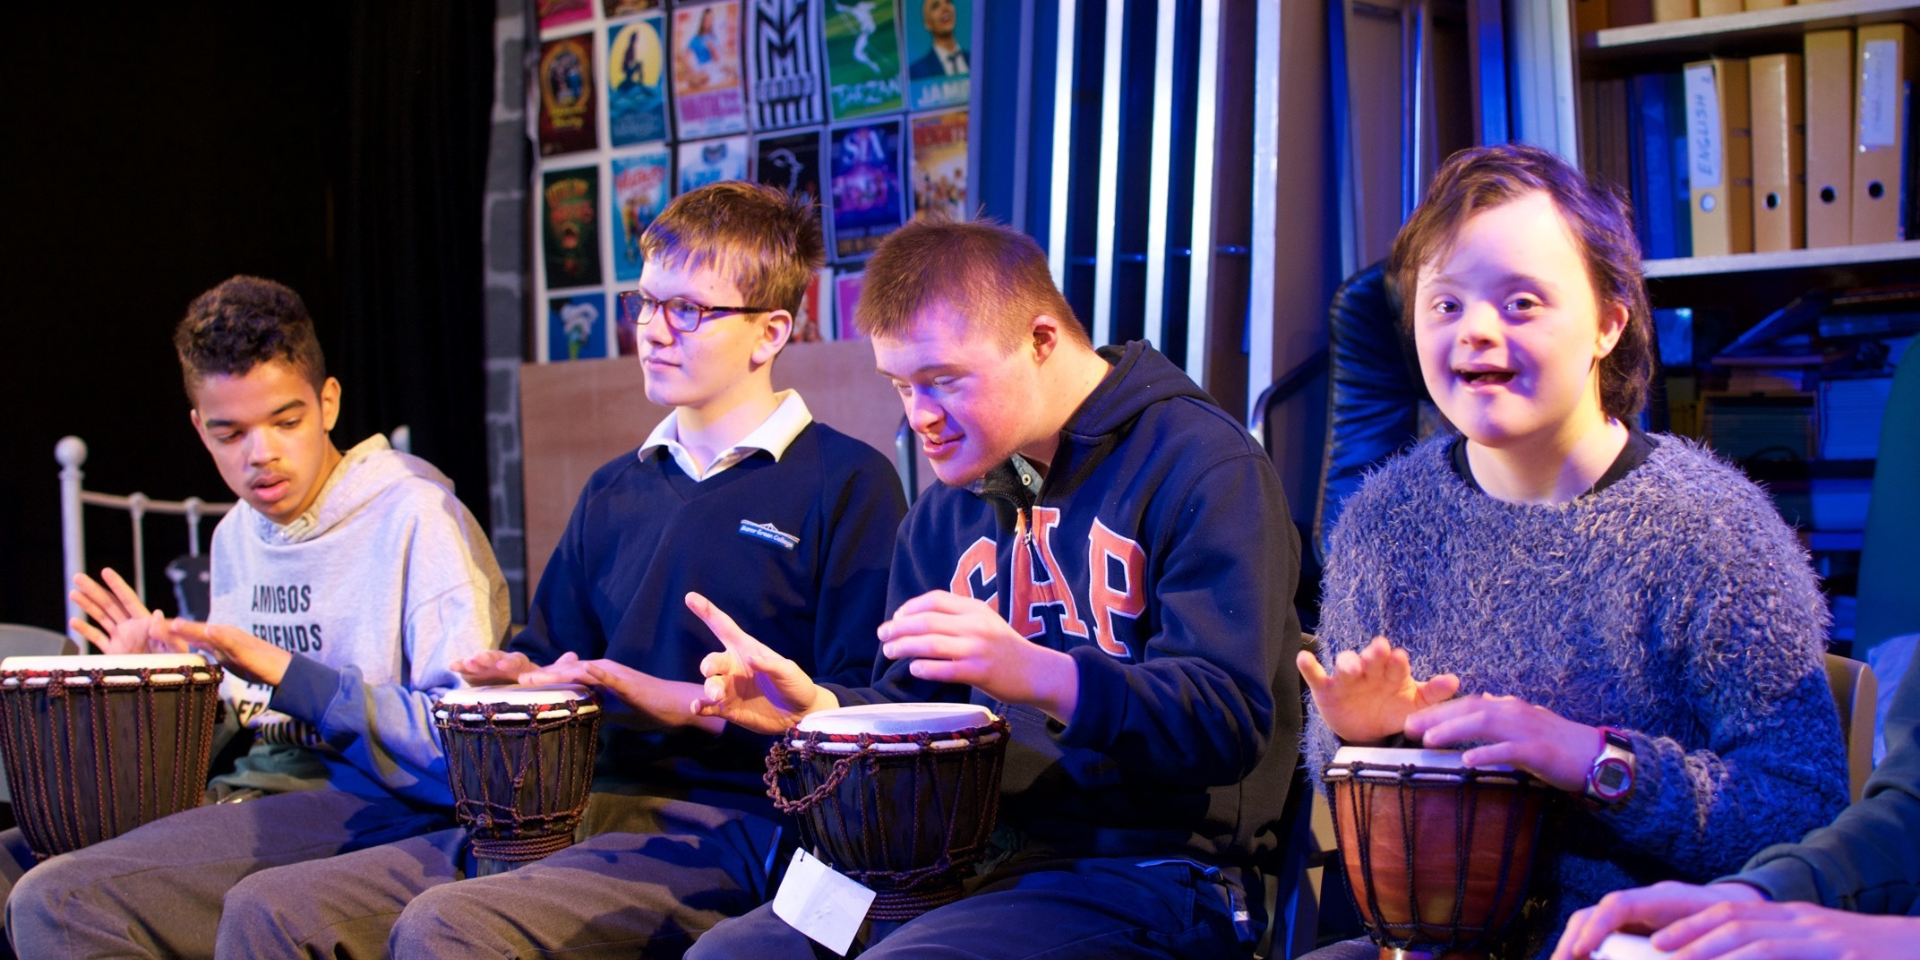 Students playing djembe drums